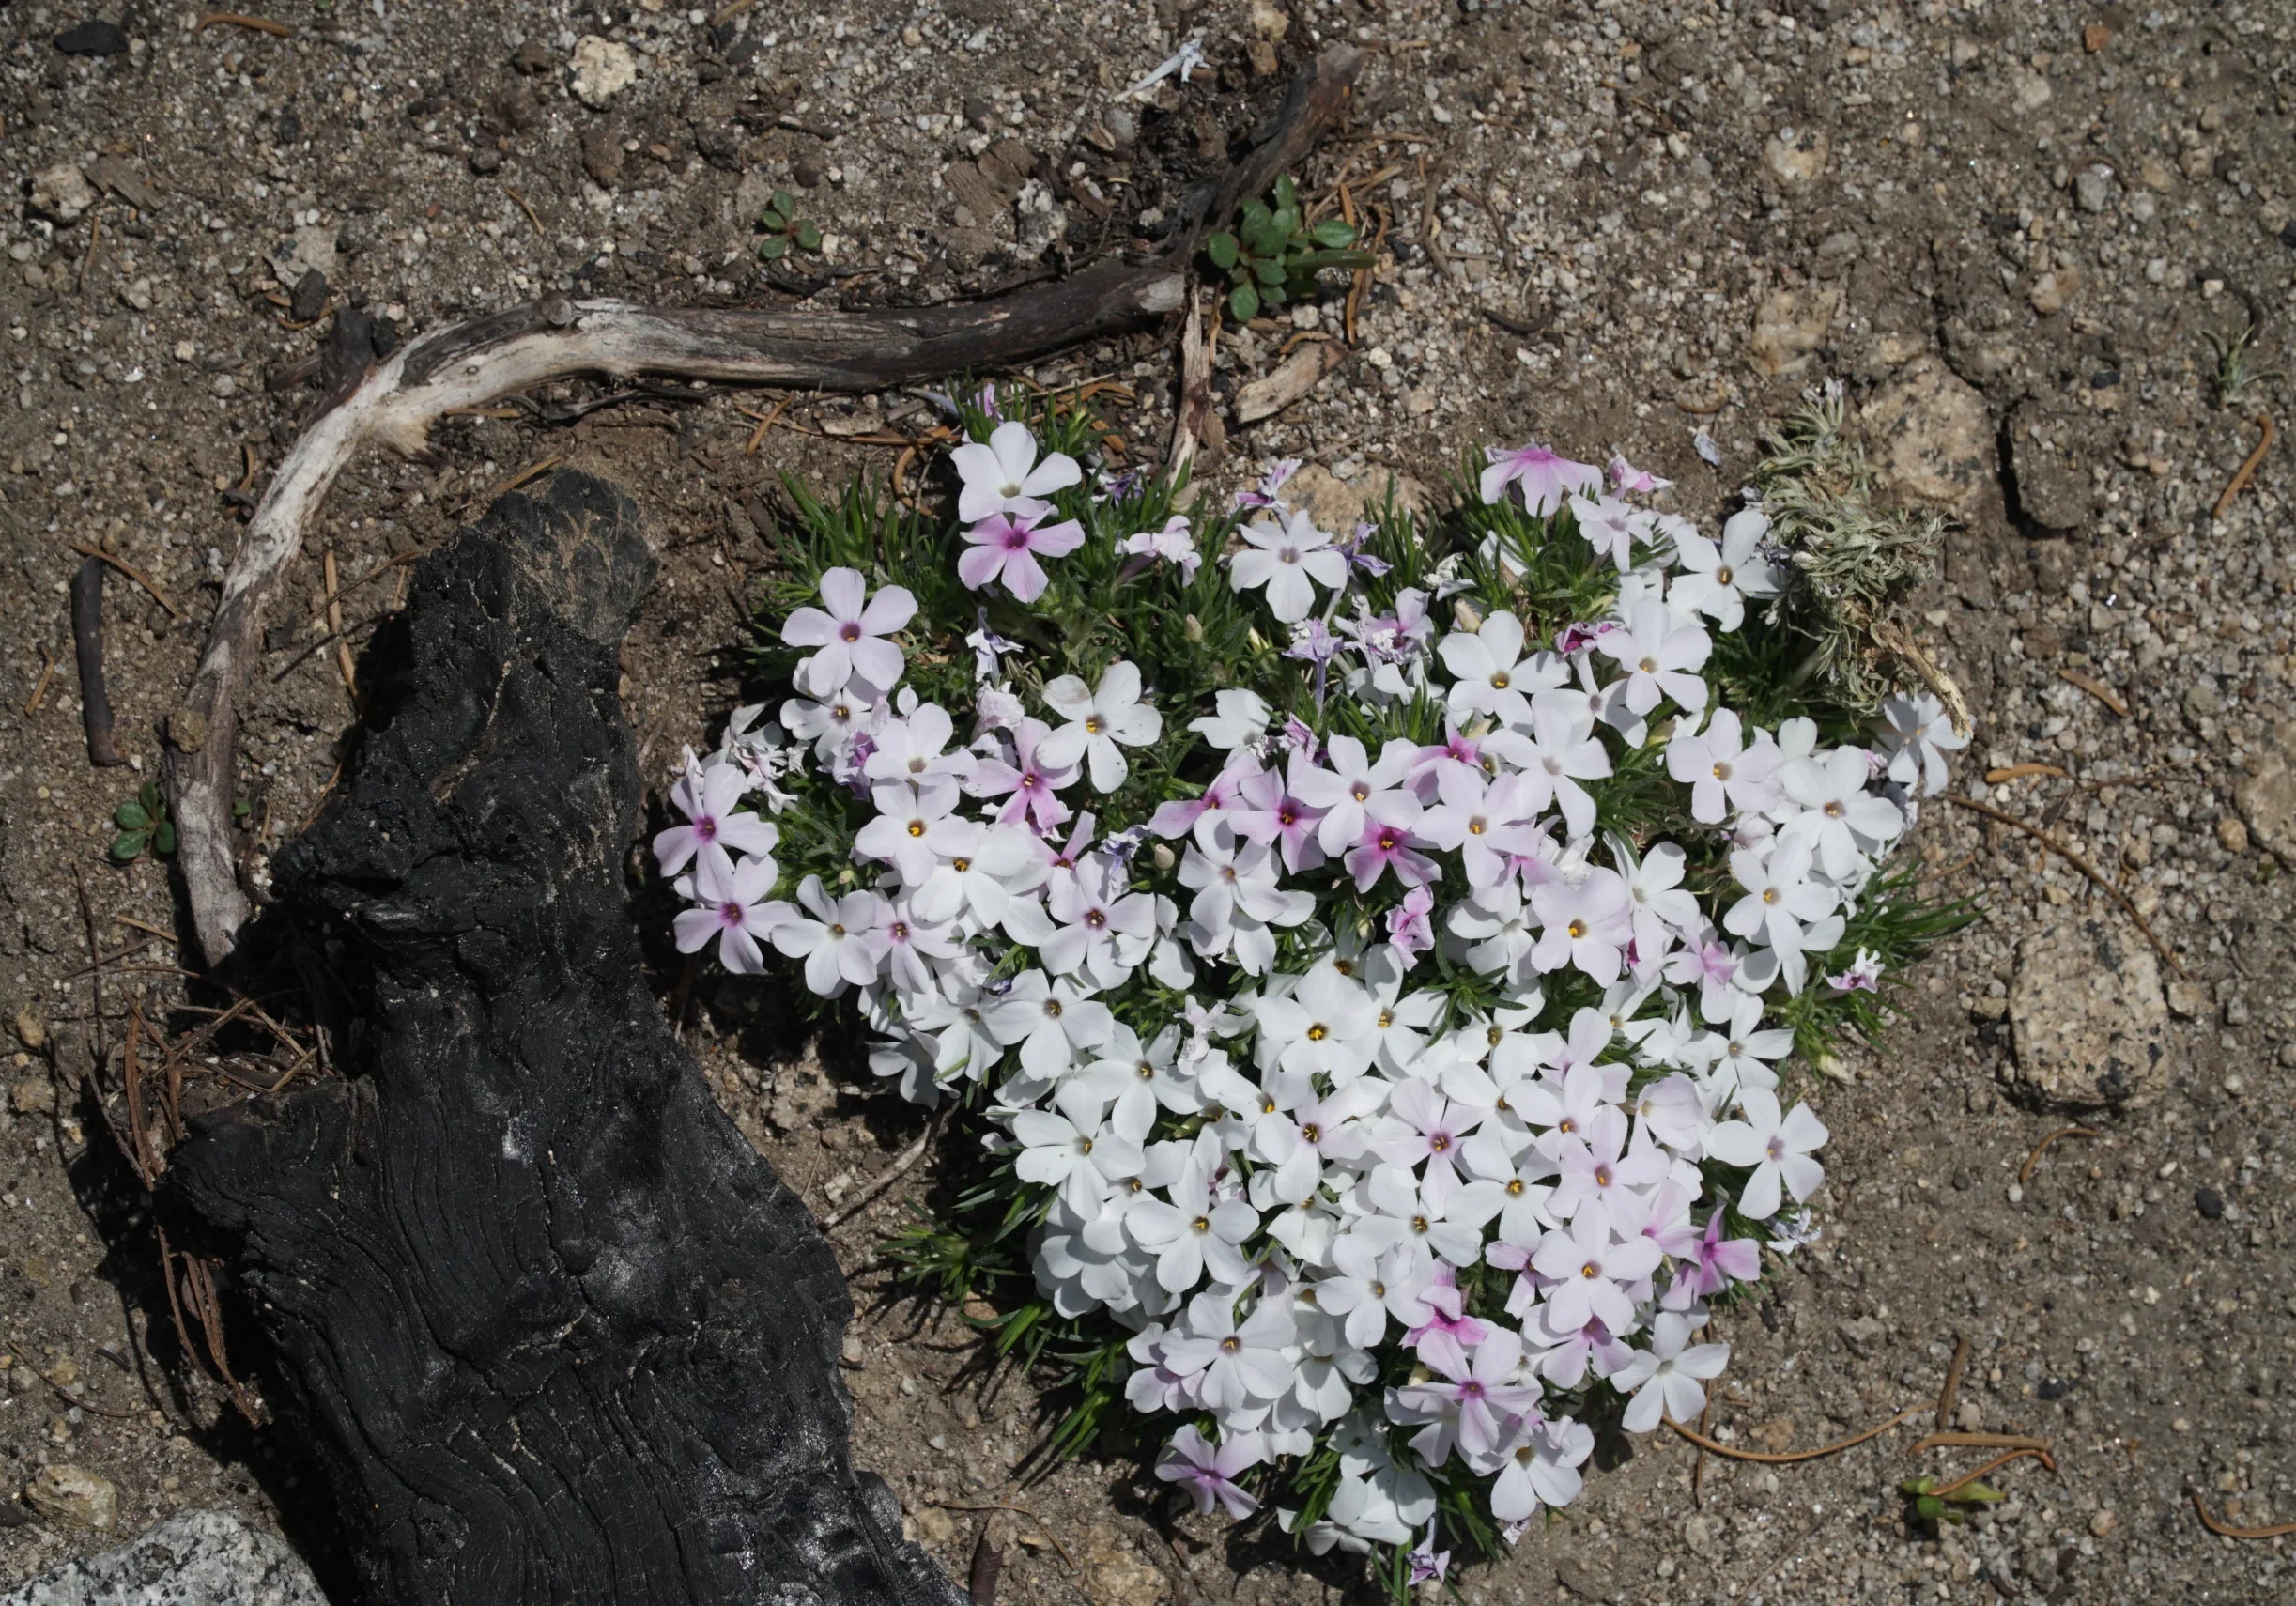 A bunch of white and pink flowers on growing on a tree stump on the floor of a forest